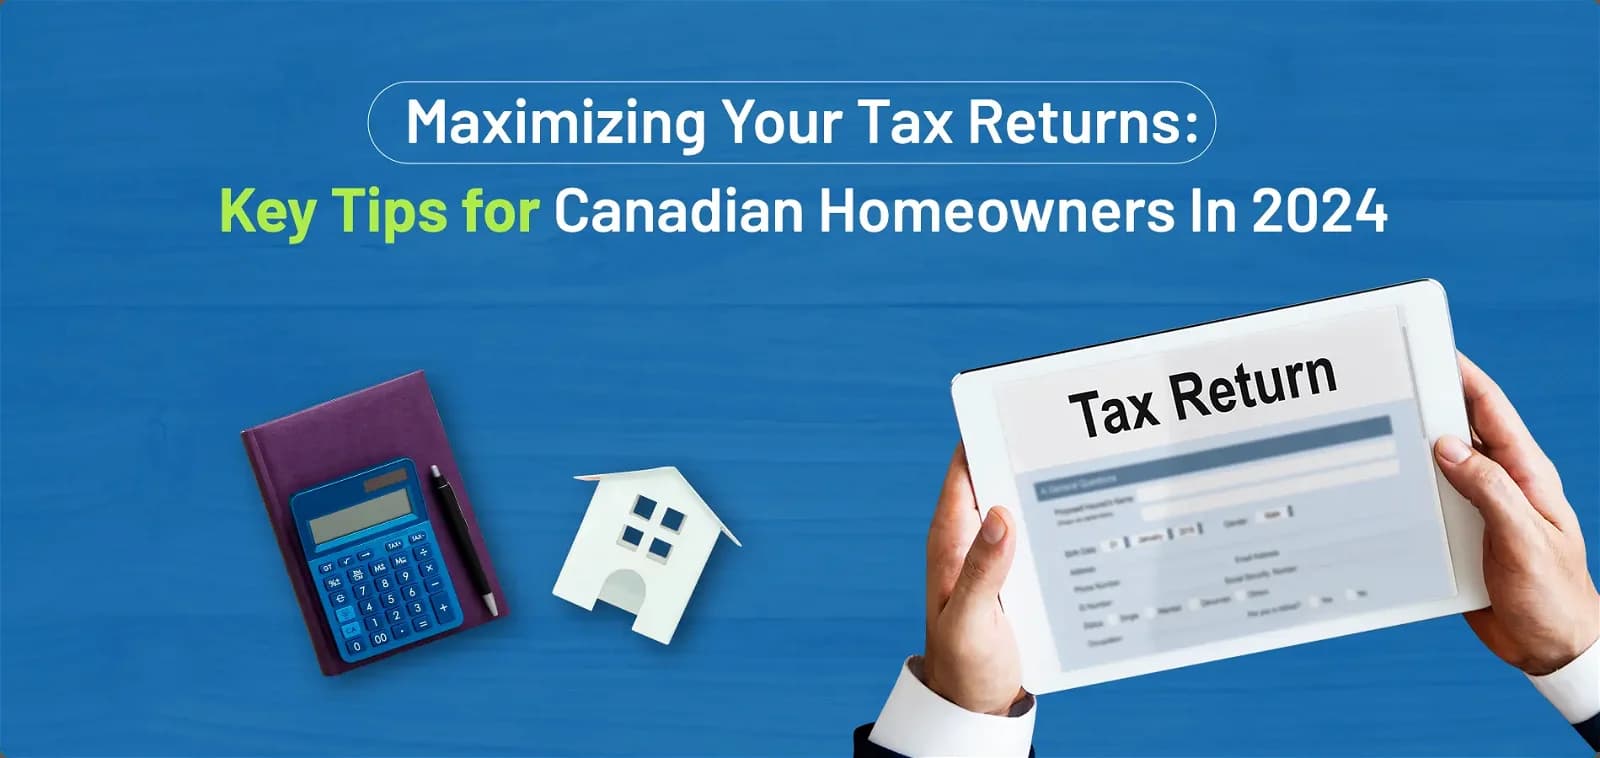 Maximizing Your Tax Returns: Key Tips for Canadian Homeowners in 2024